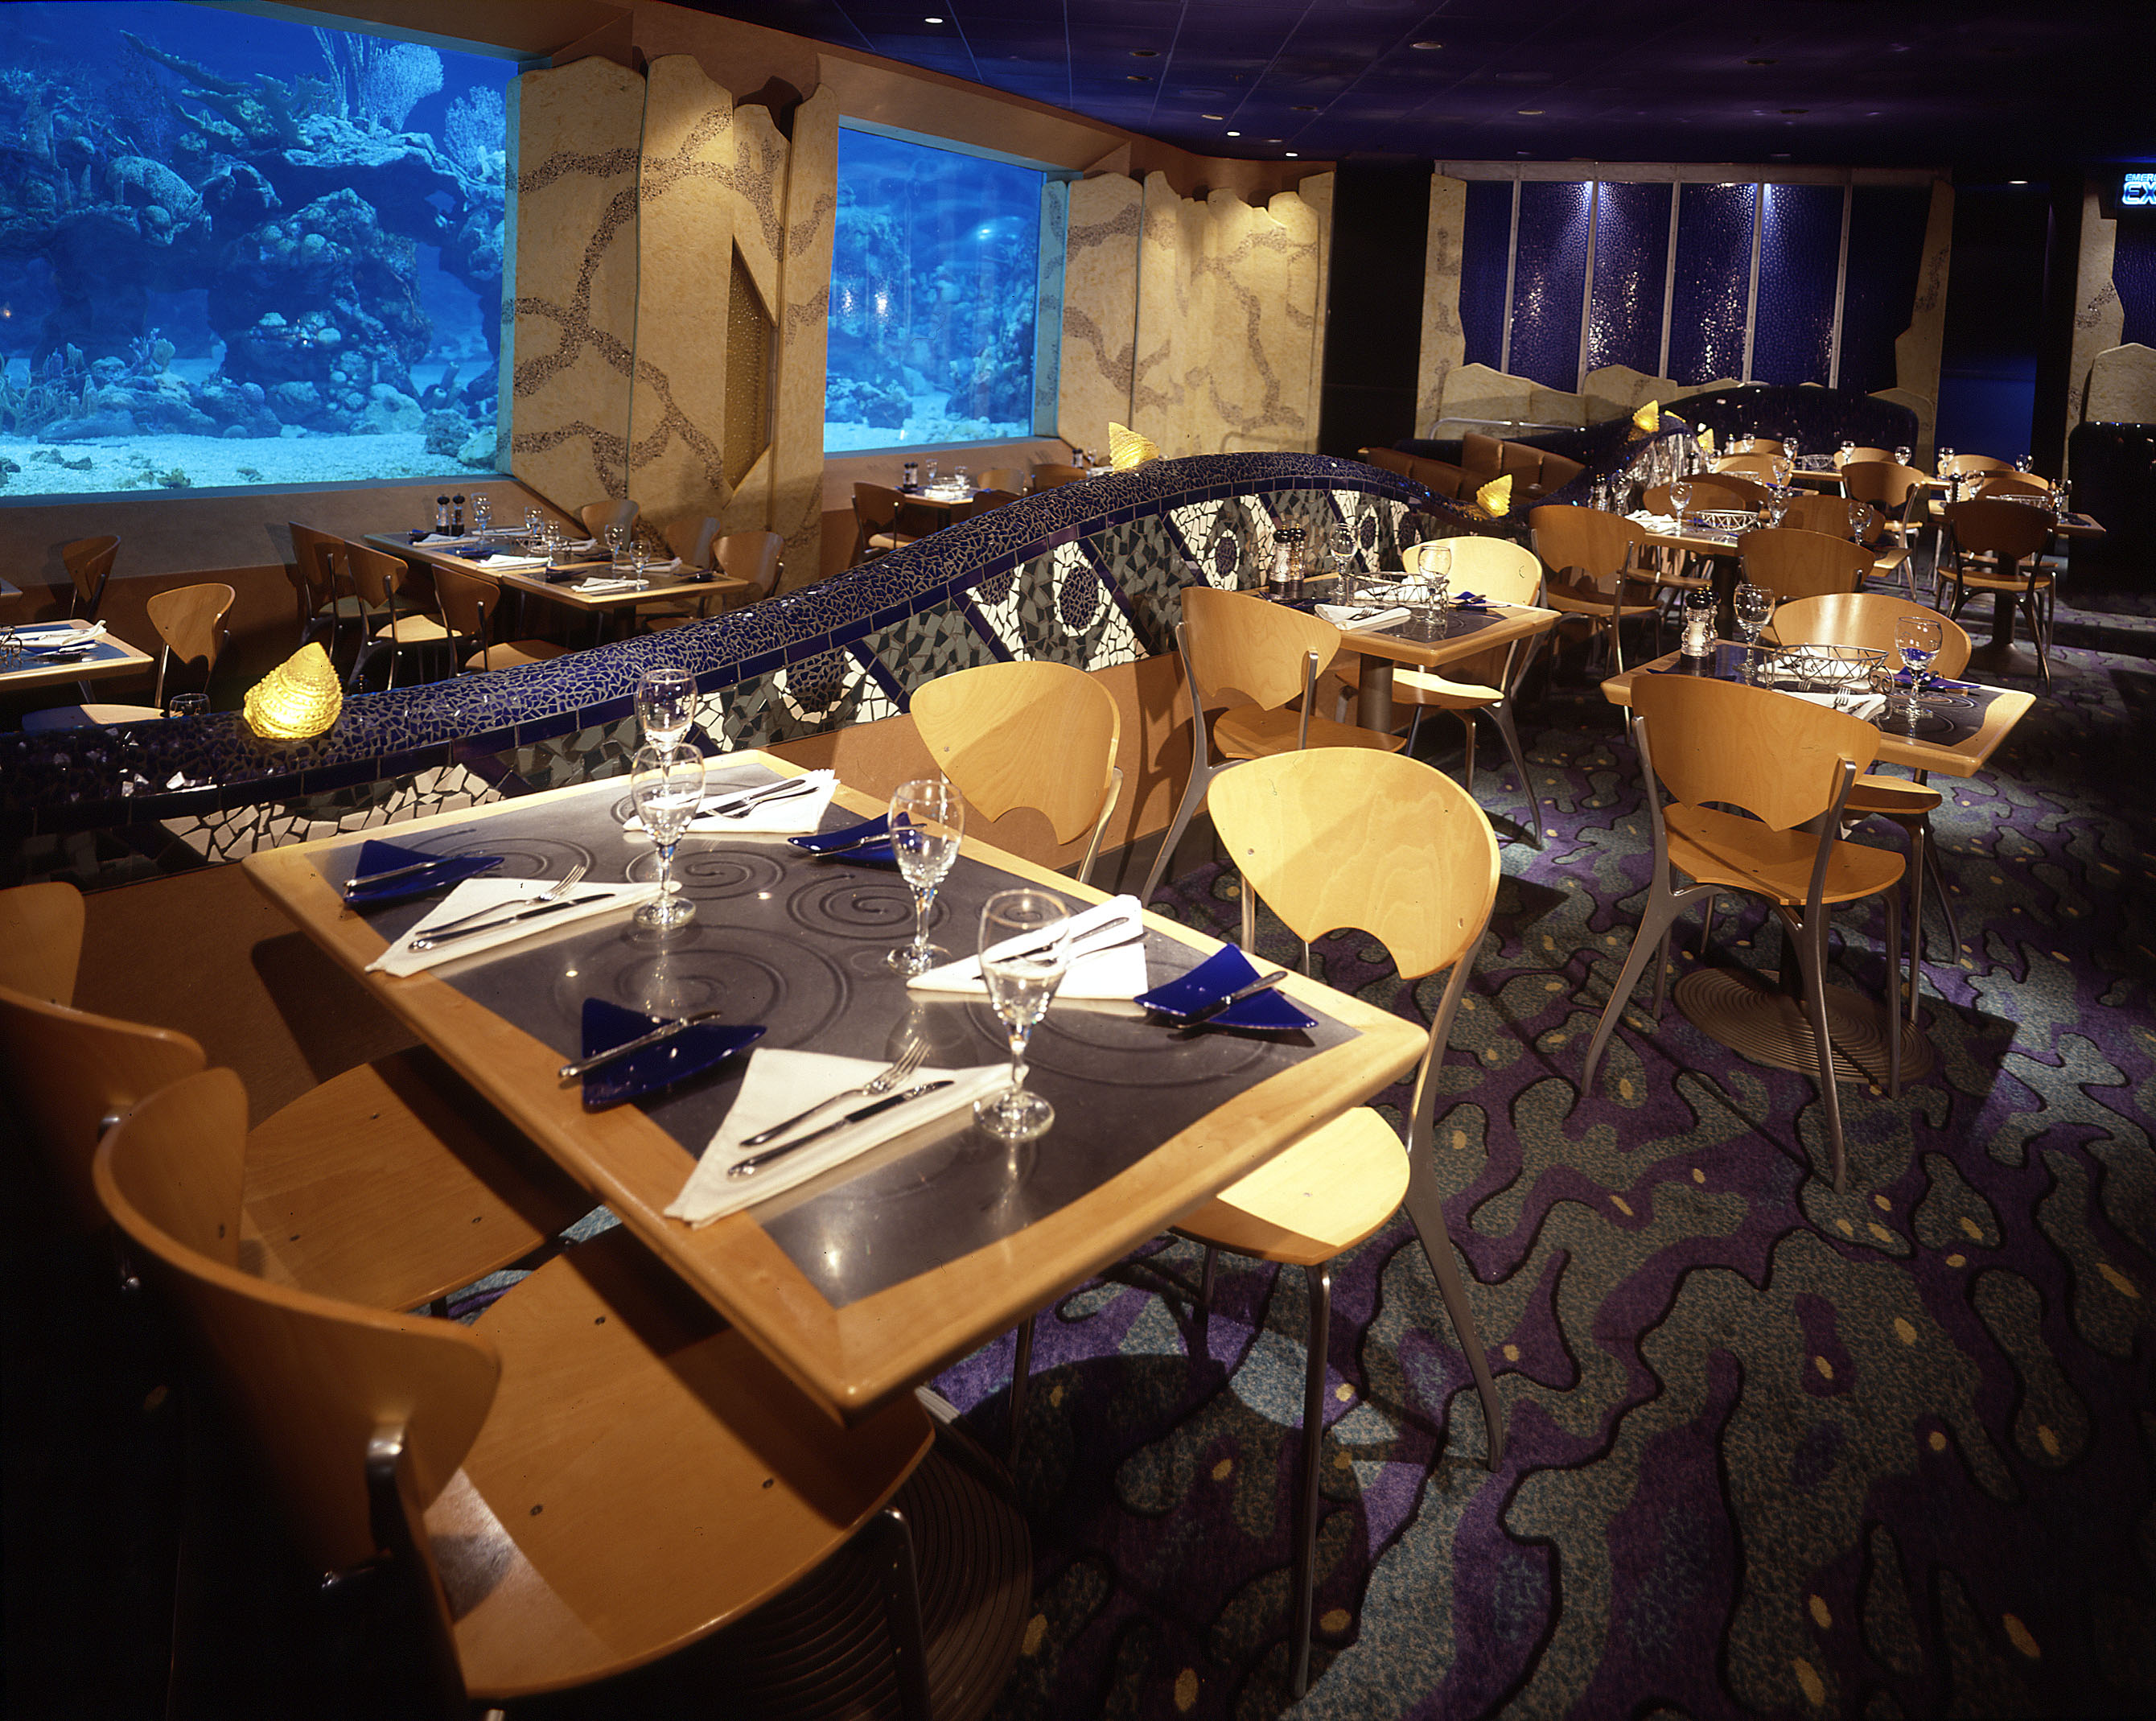 Coral Reef Restaurant in Epcot